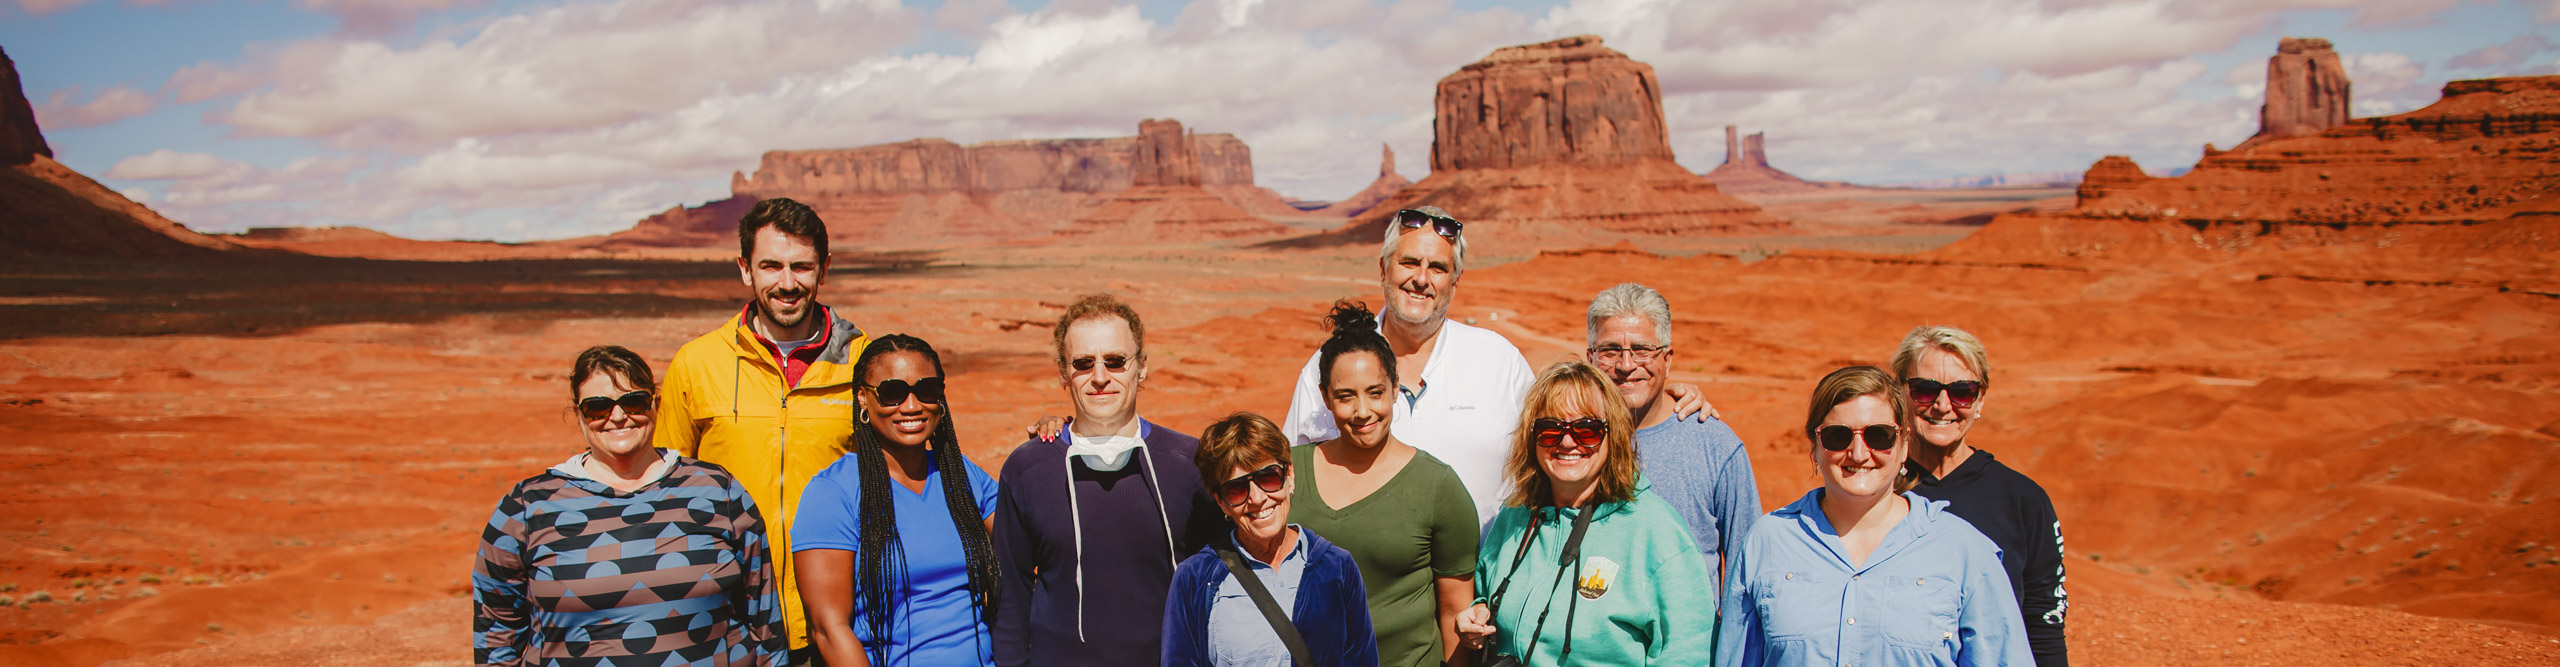 Group at Monument Valley on a clear sunny day, USA